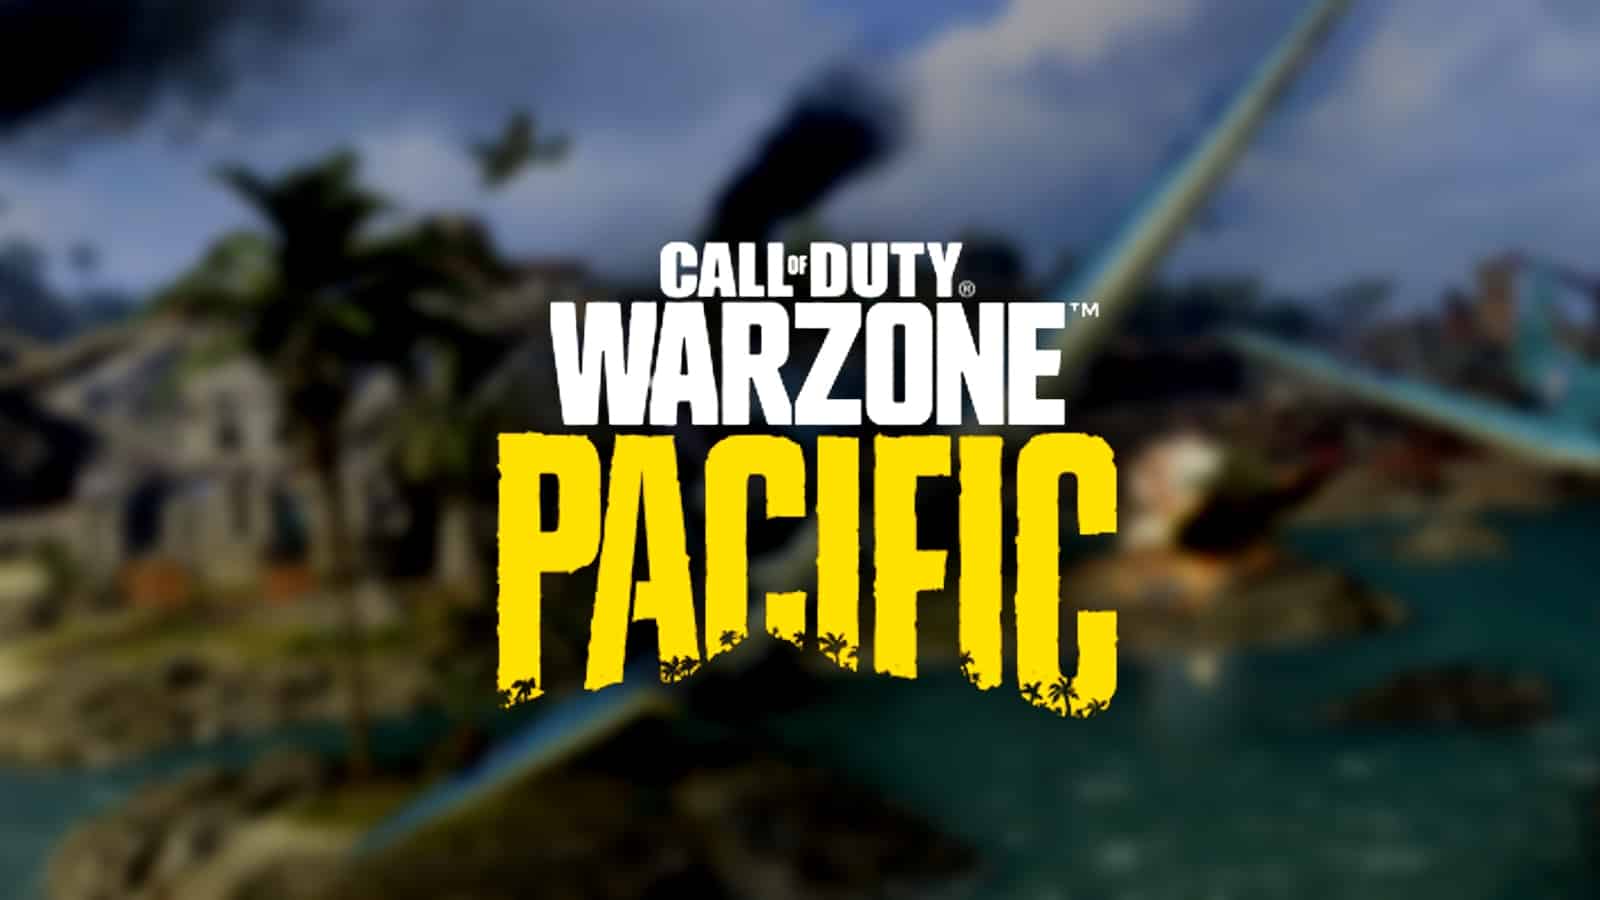 Warzone pacific with blurred caldera background